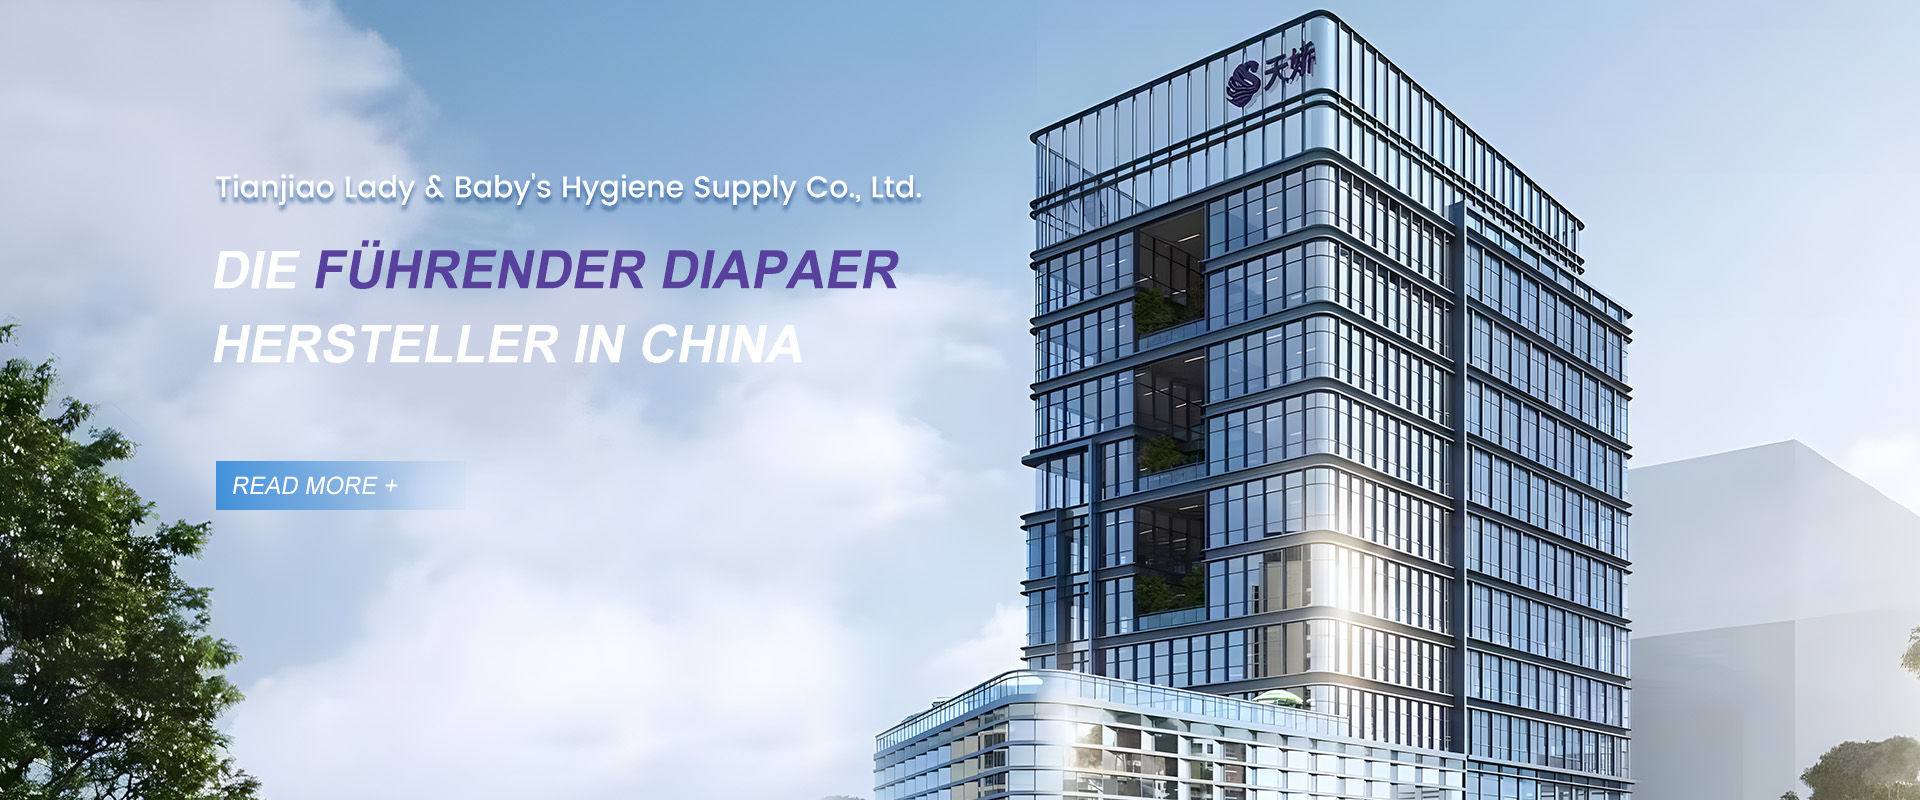 The leading diaper manufacturer in China